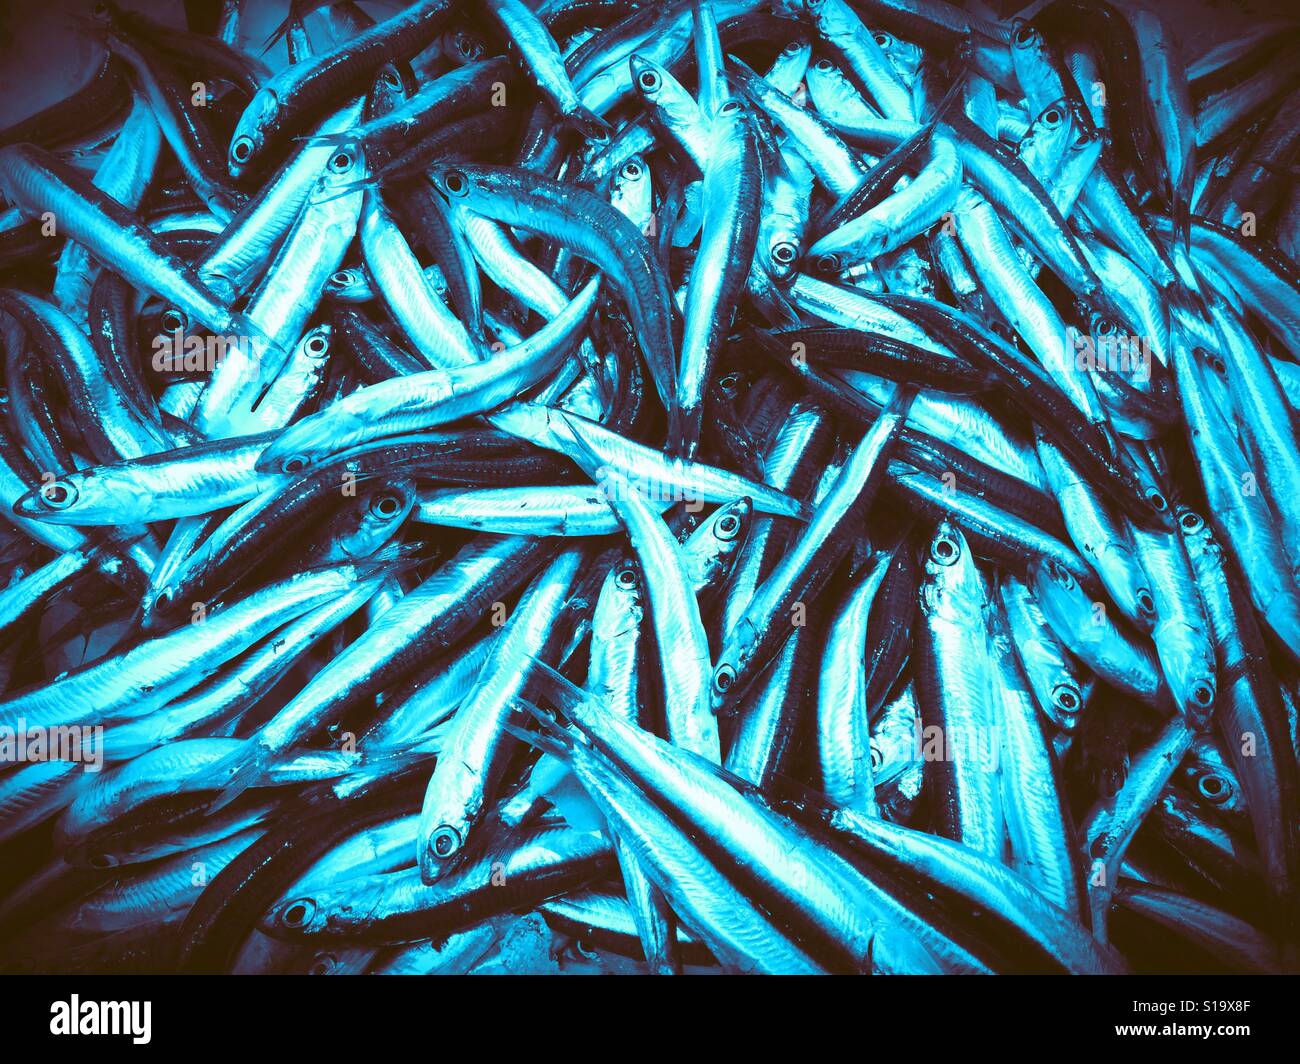 Anchovies for sale. Stock Photo